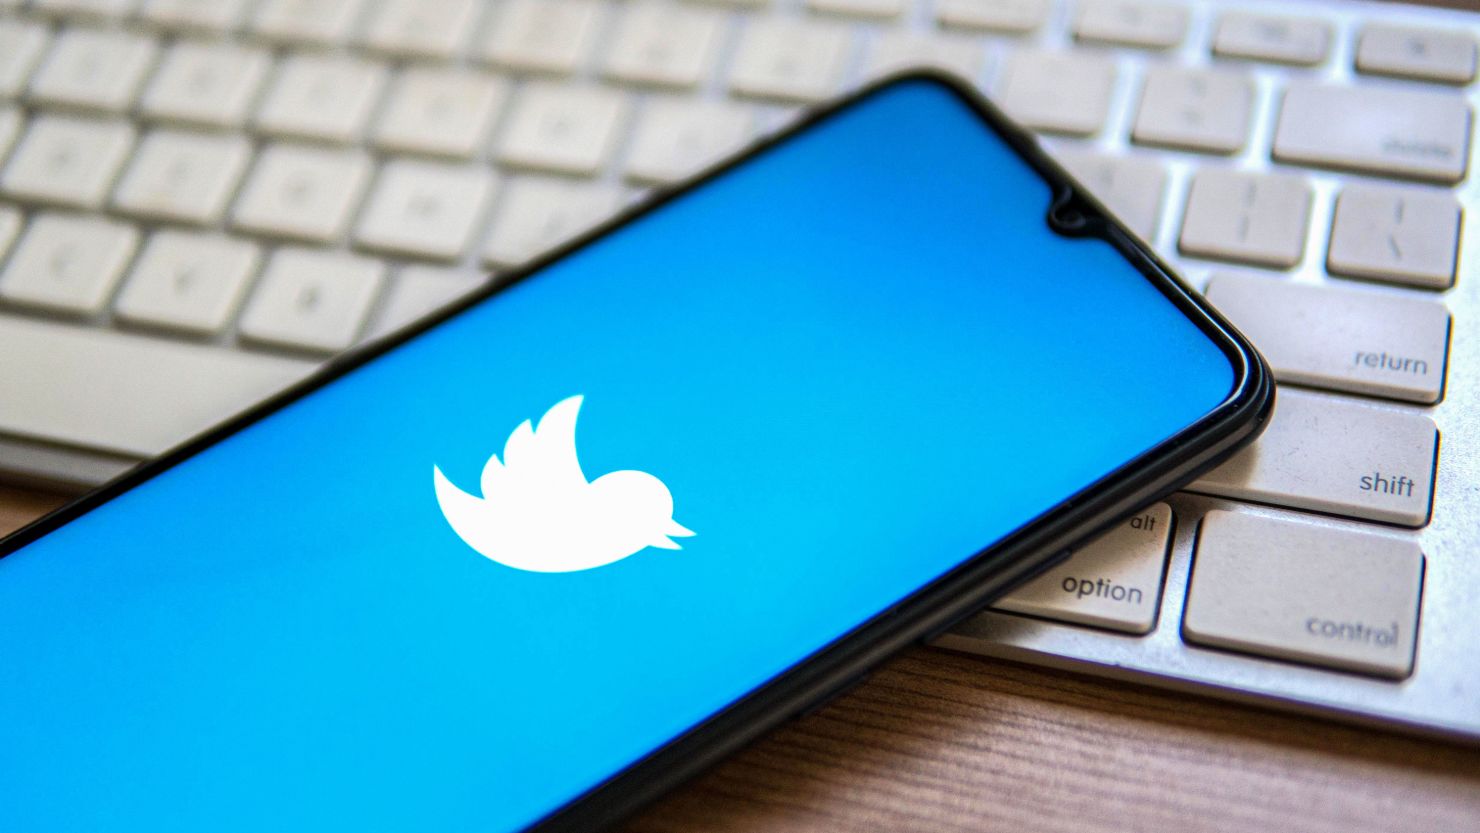 Twitter announced that it will eliminate free API access. Users are lamenting the changes this may have on the platform's culture, while others have expressed concerns about its effects on research.